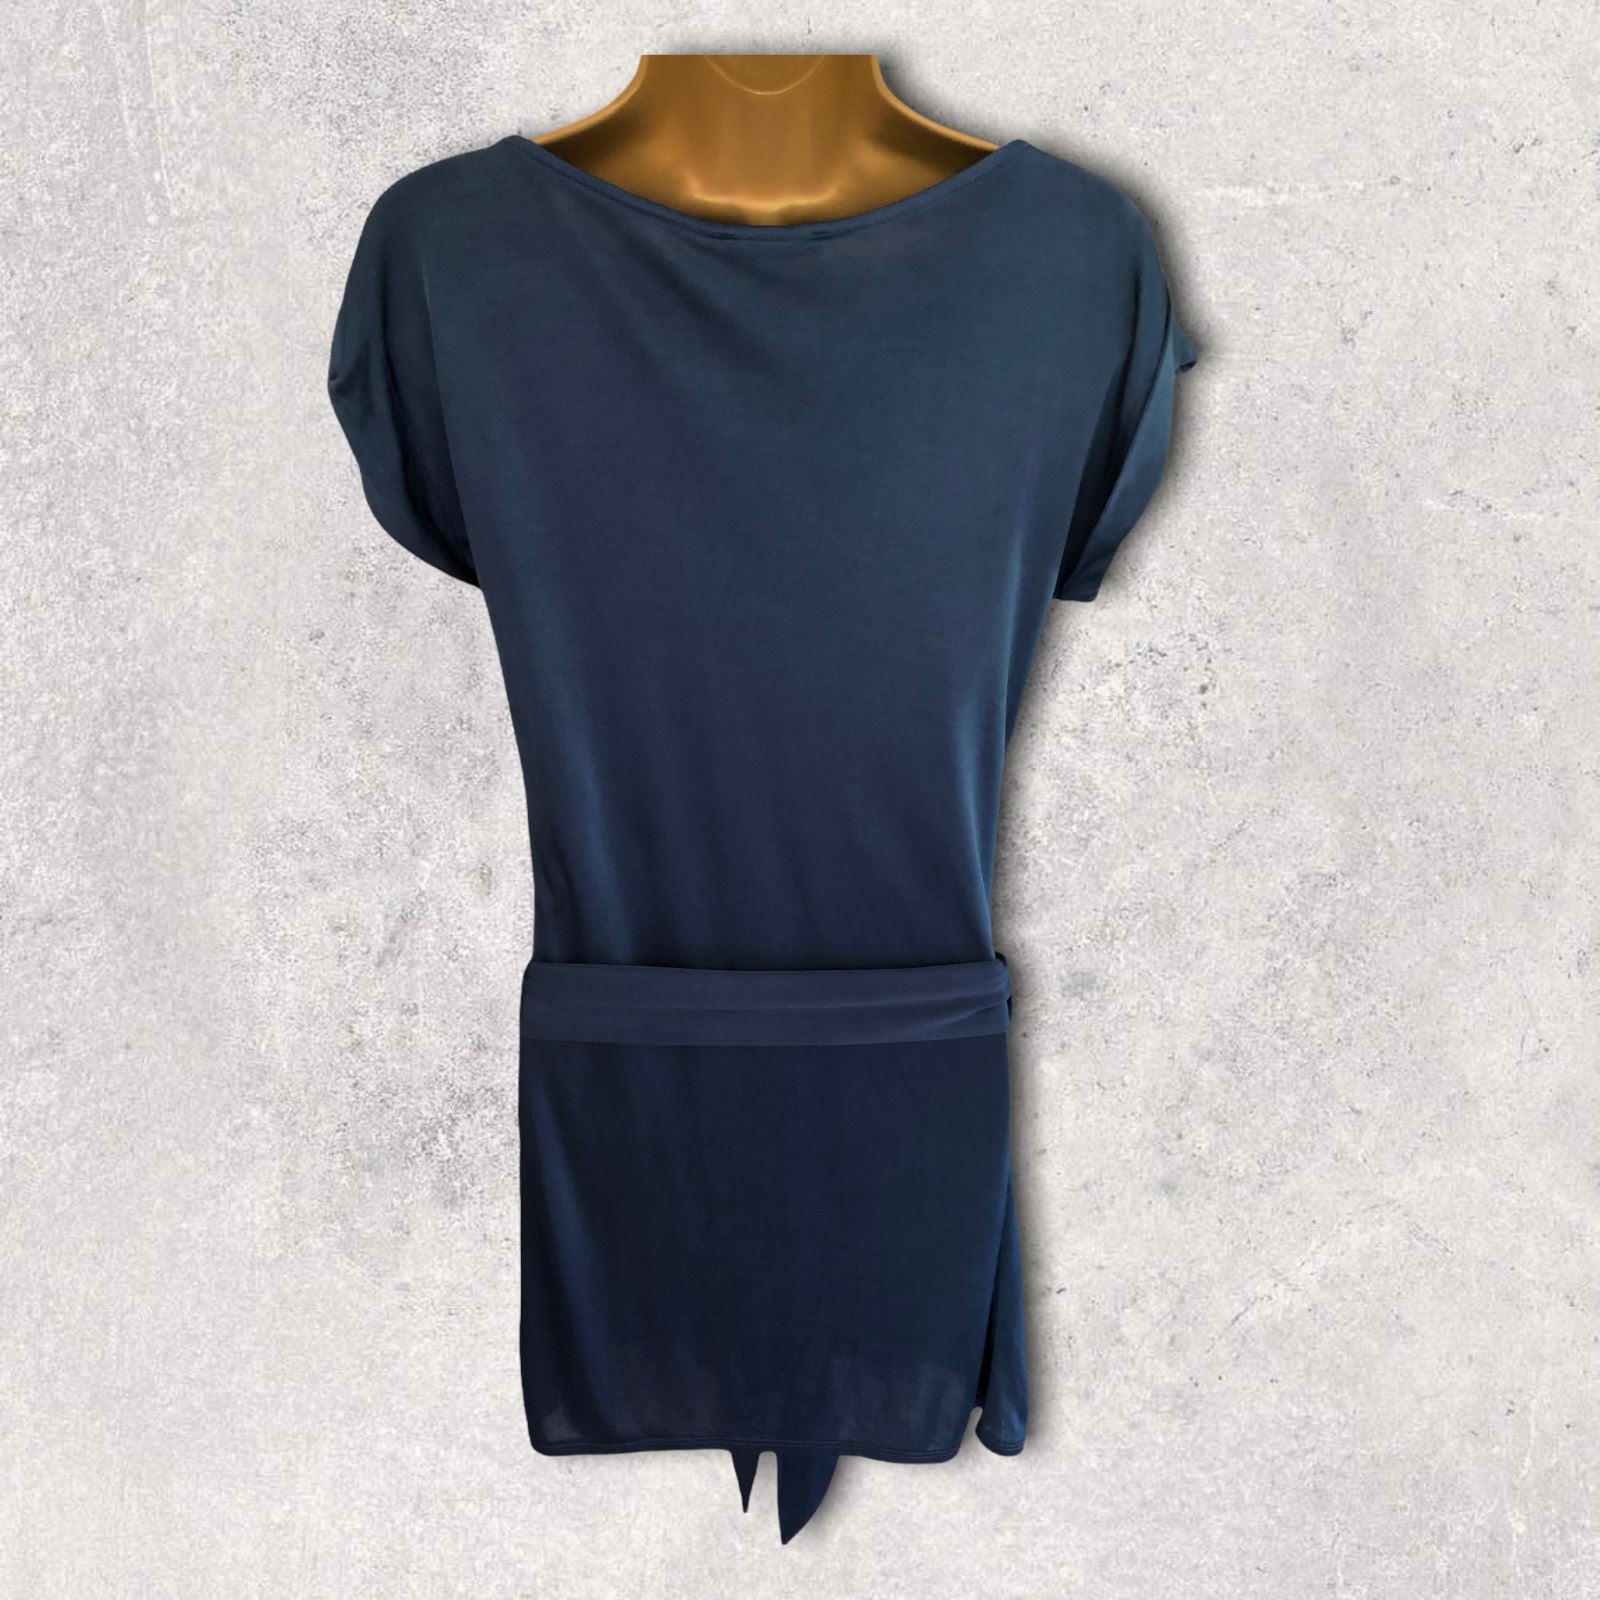 Linea Long Blue Belted Silky Top Size M UK 12 US 8 EU 40 BNWT Timeless Fashions